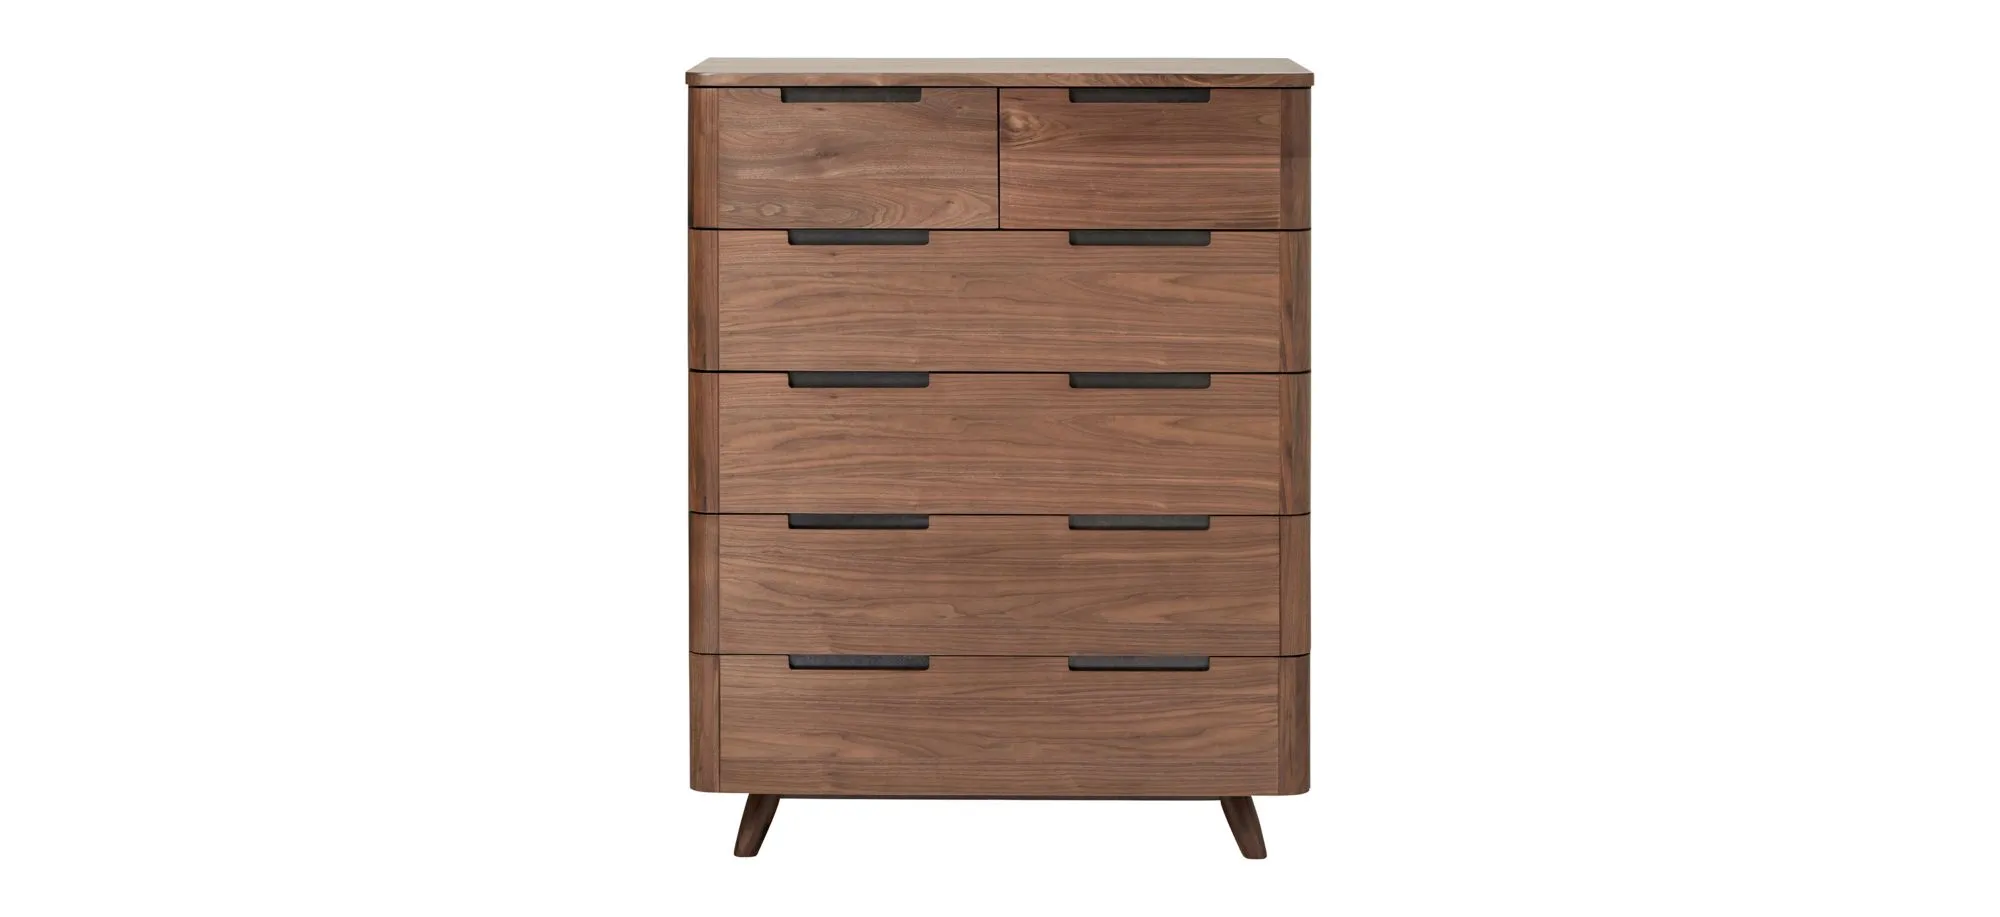 Tahoe High Chest in Walnut by Unique Furniture